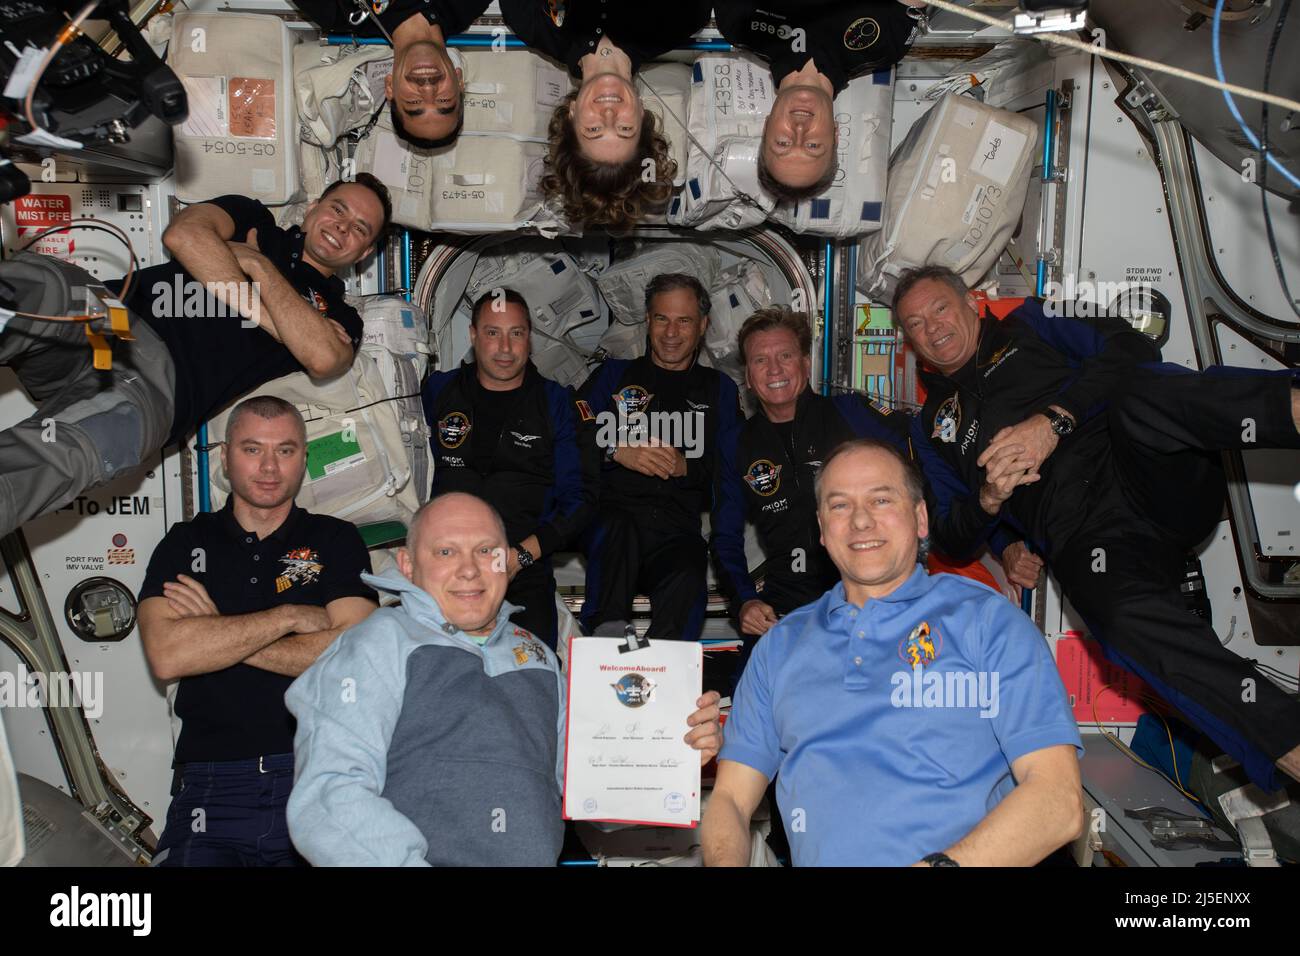 International Space Station, United States of America. 09 April, 2022. The eleven crew members aboard the International Space Station pose for a group photo after the Axiom Mission One crew arrived aboard the SpaceX Crew Dragon Endeavour, April 9, 2022 in Earth Orbit. Clockwise from bottom right:  Expedition 67 Commander Tom Marshburn, Flight Engineers Oleg Artemyev, Denis Matveev, Sergey Korsakov, Raja Chari, Kayla Barron, and Matthias Maurer; and Axiom astronauts (center row from left) Mark Pathy, Eytan Stibbe, Larry Conner, and Michael Lopez-Alegria. Credit: NASA Photo/NASA/Alamy Live News Stock Photo